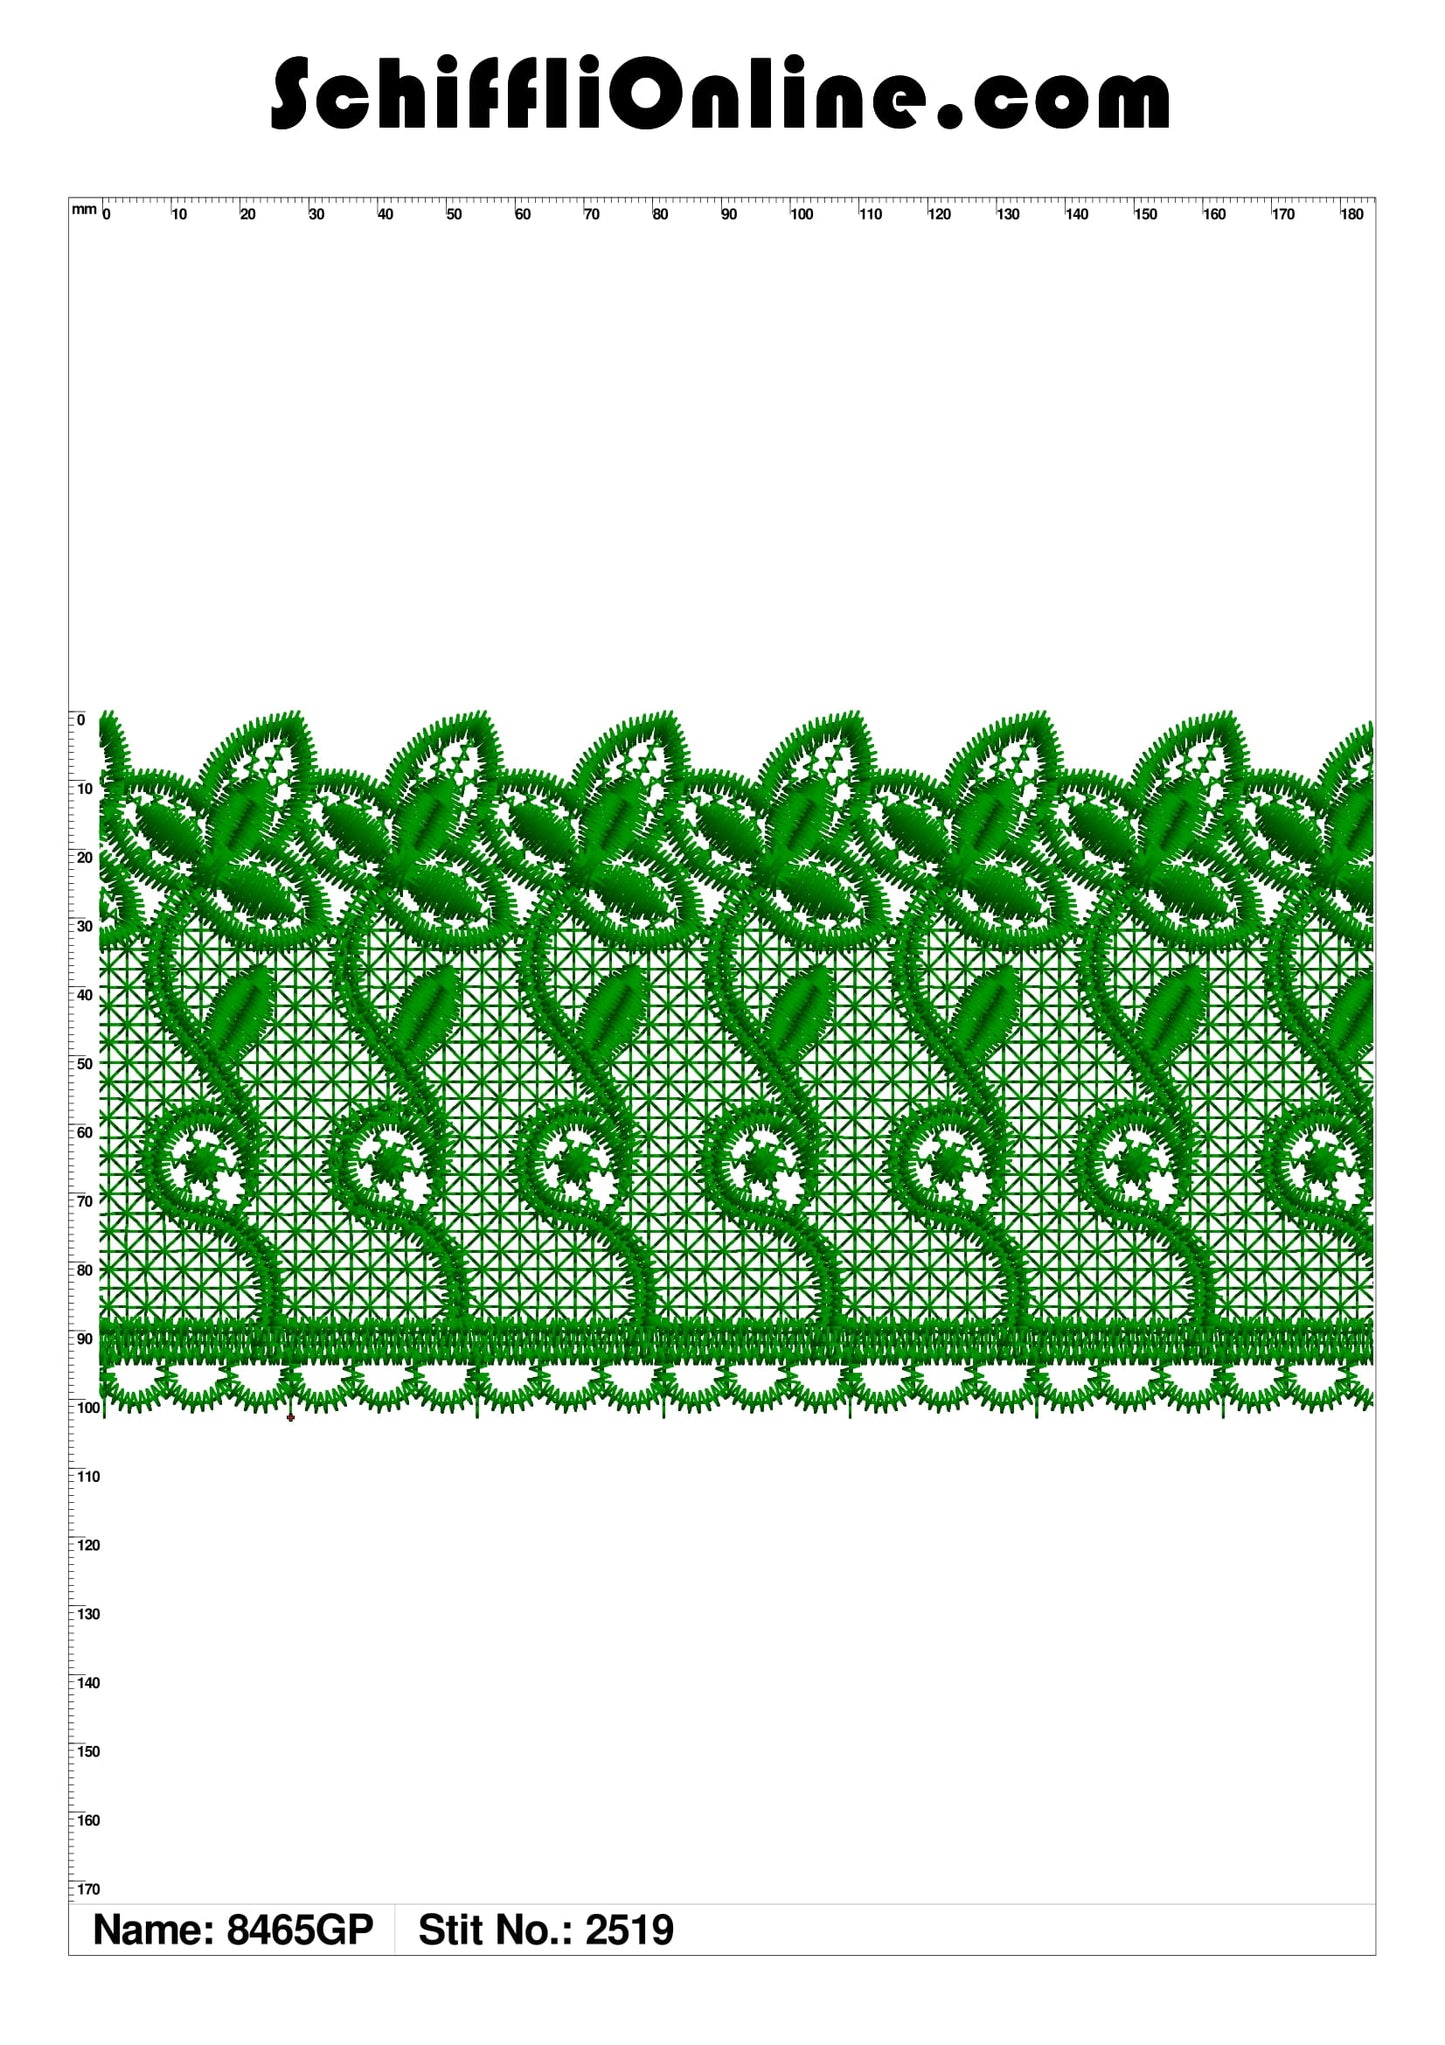 Book 175 CHEMICAL LACE 4X4 50 DESIGNS